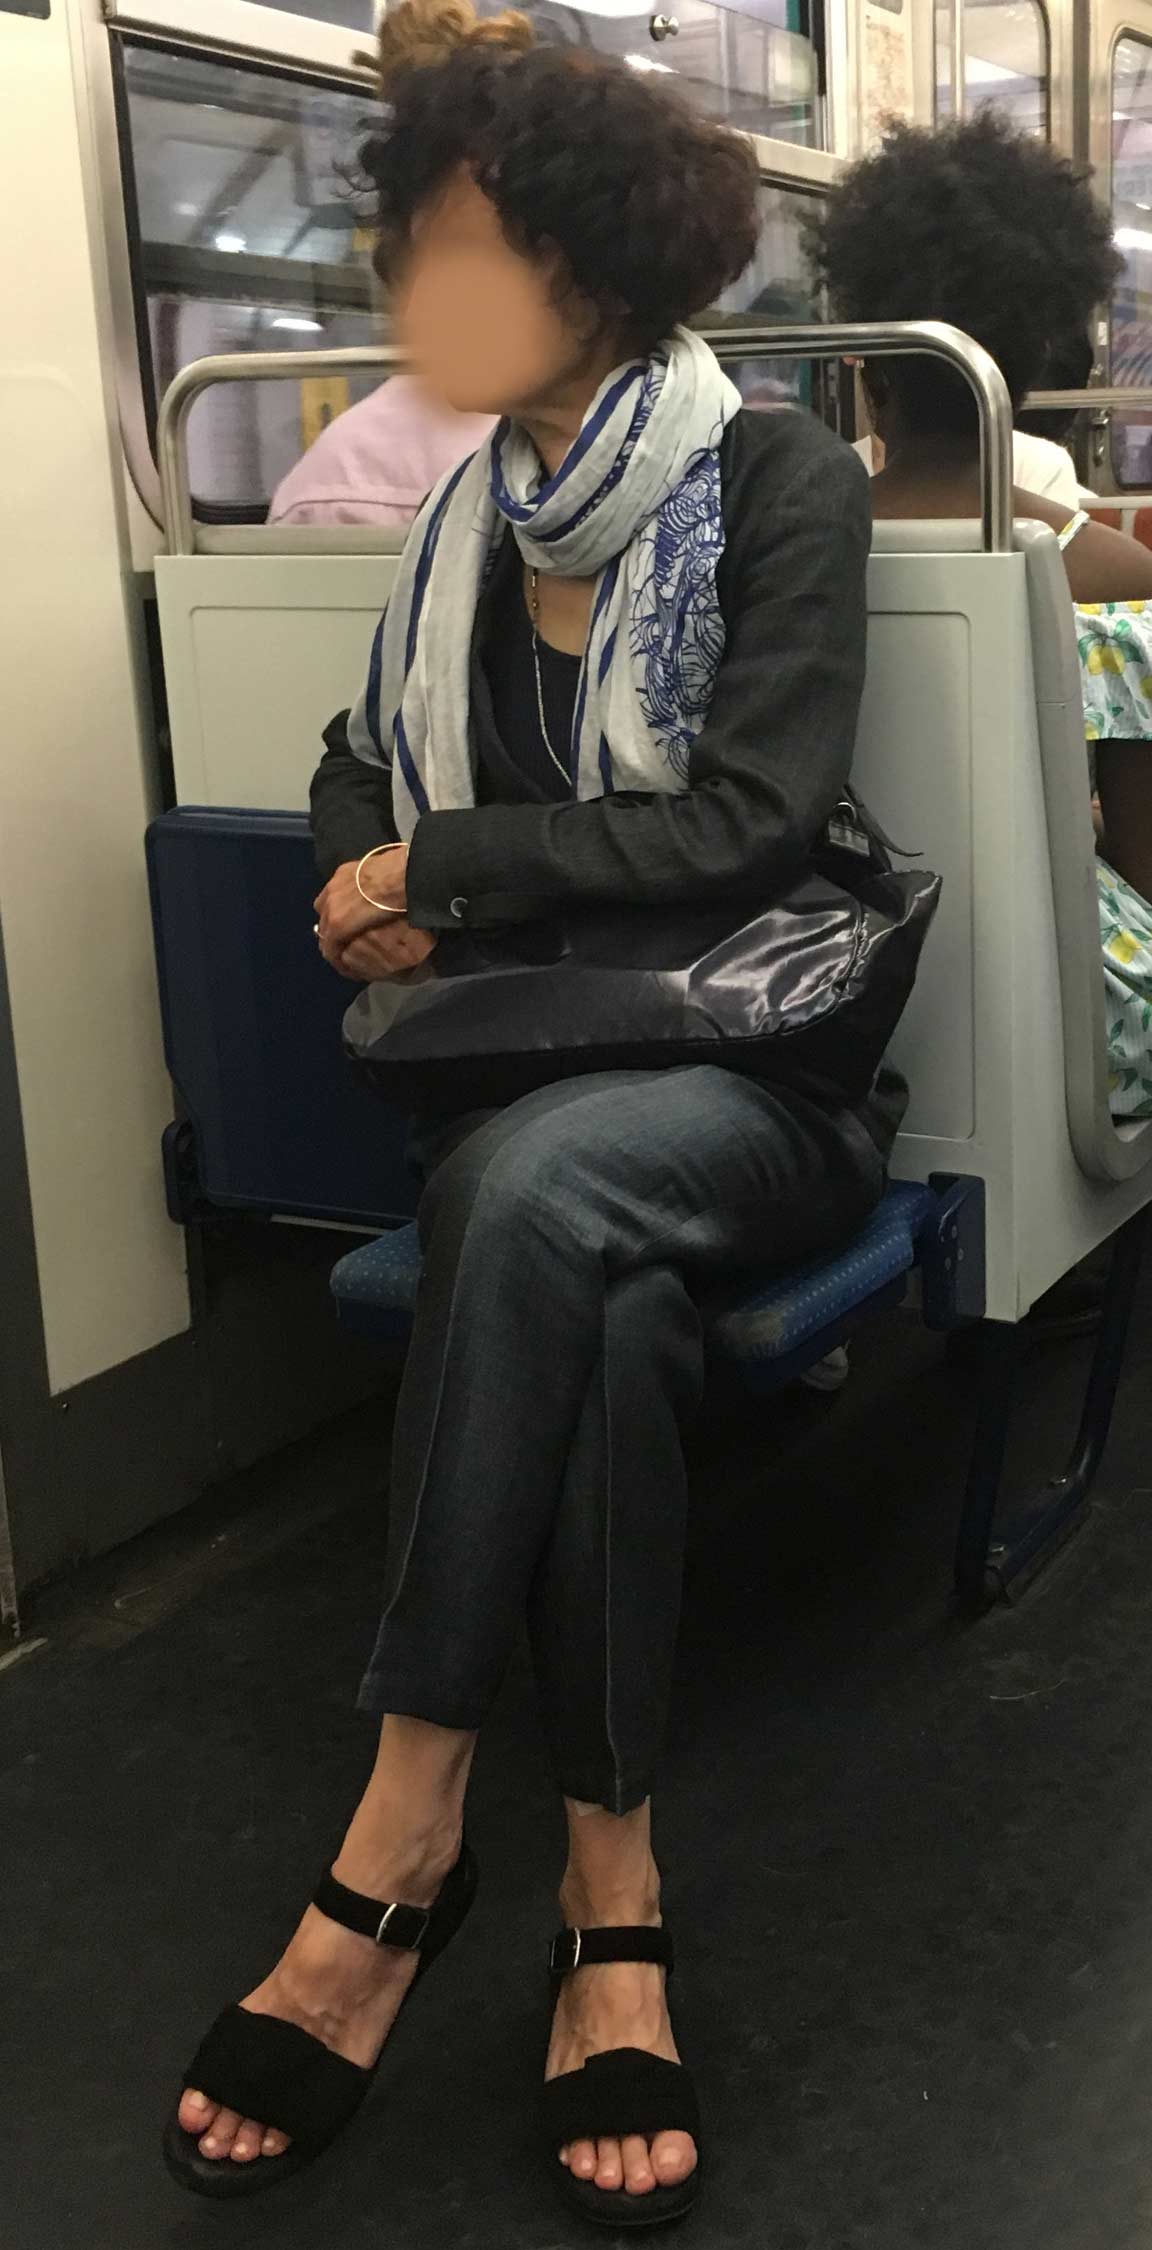 Certain age chic spotted in the Paris Metro